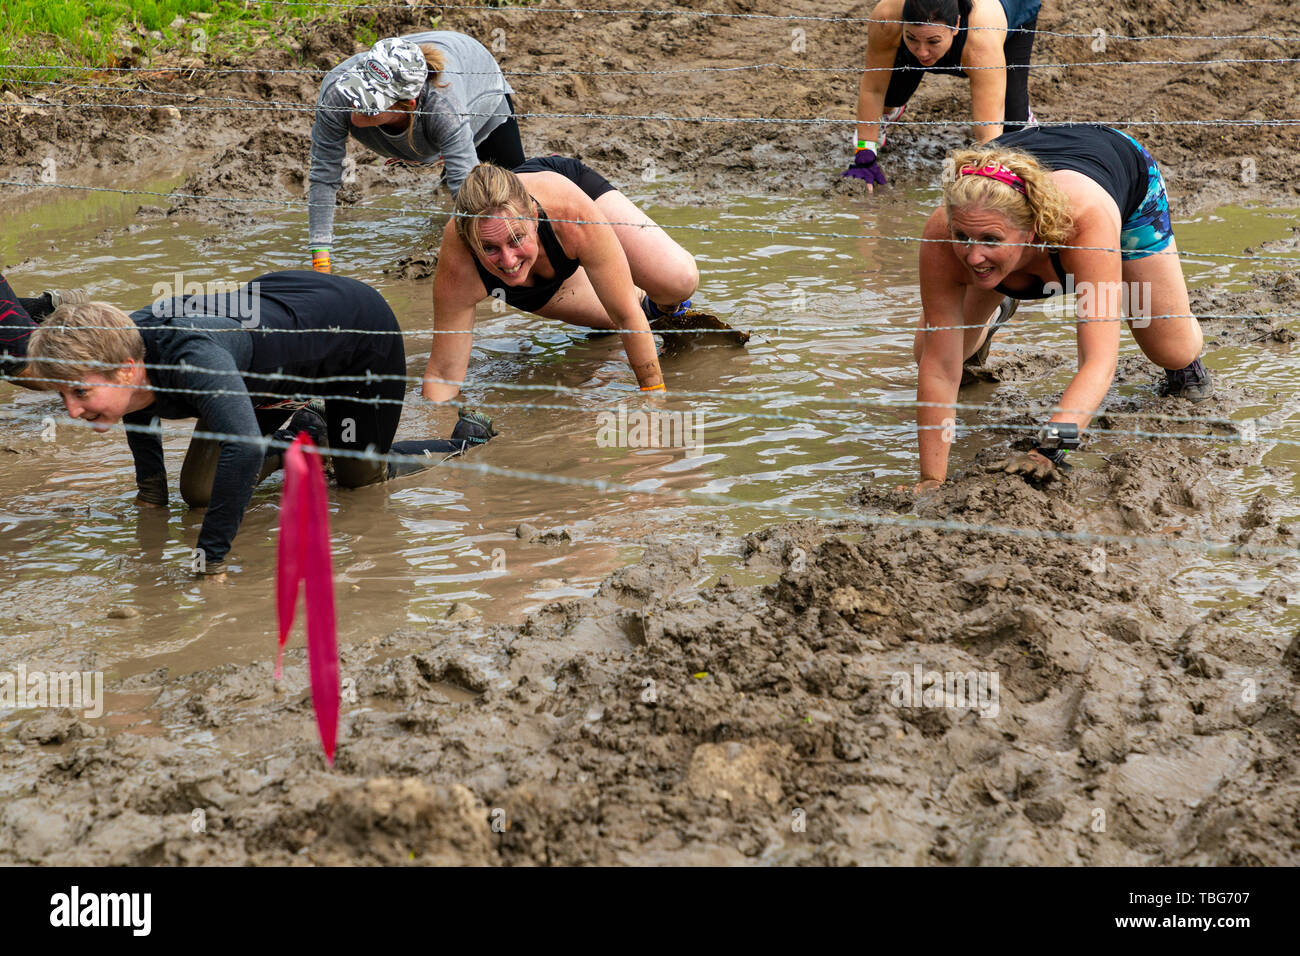 Rugged Maniac Obstacle Race Kitchener Ontario Canada June 01 2019 Stock Photo